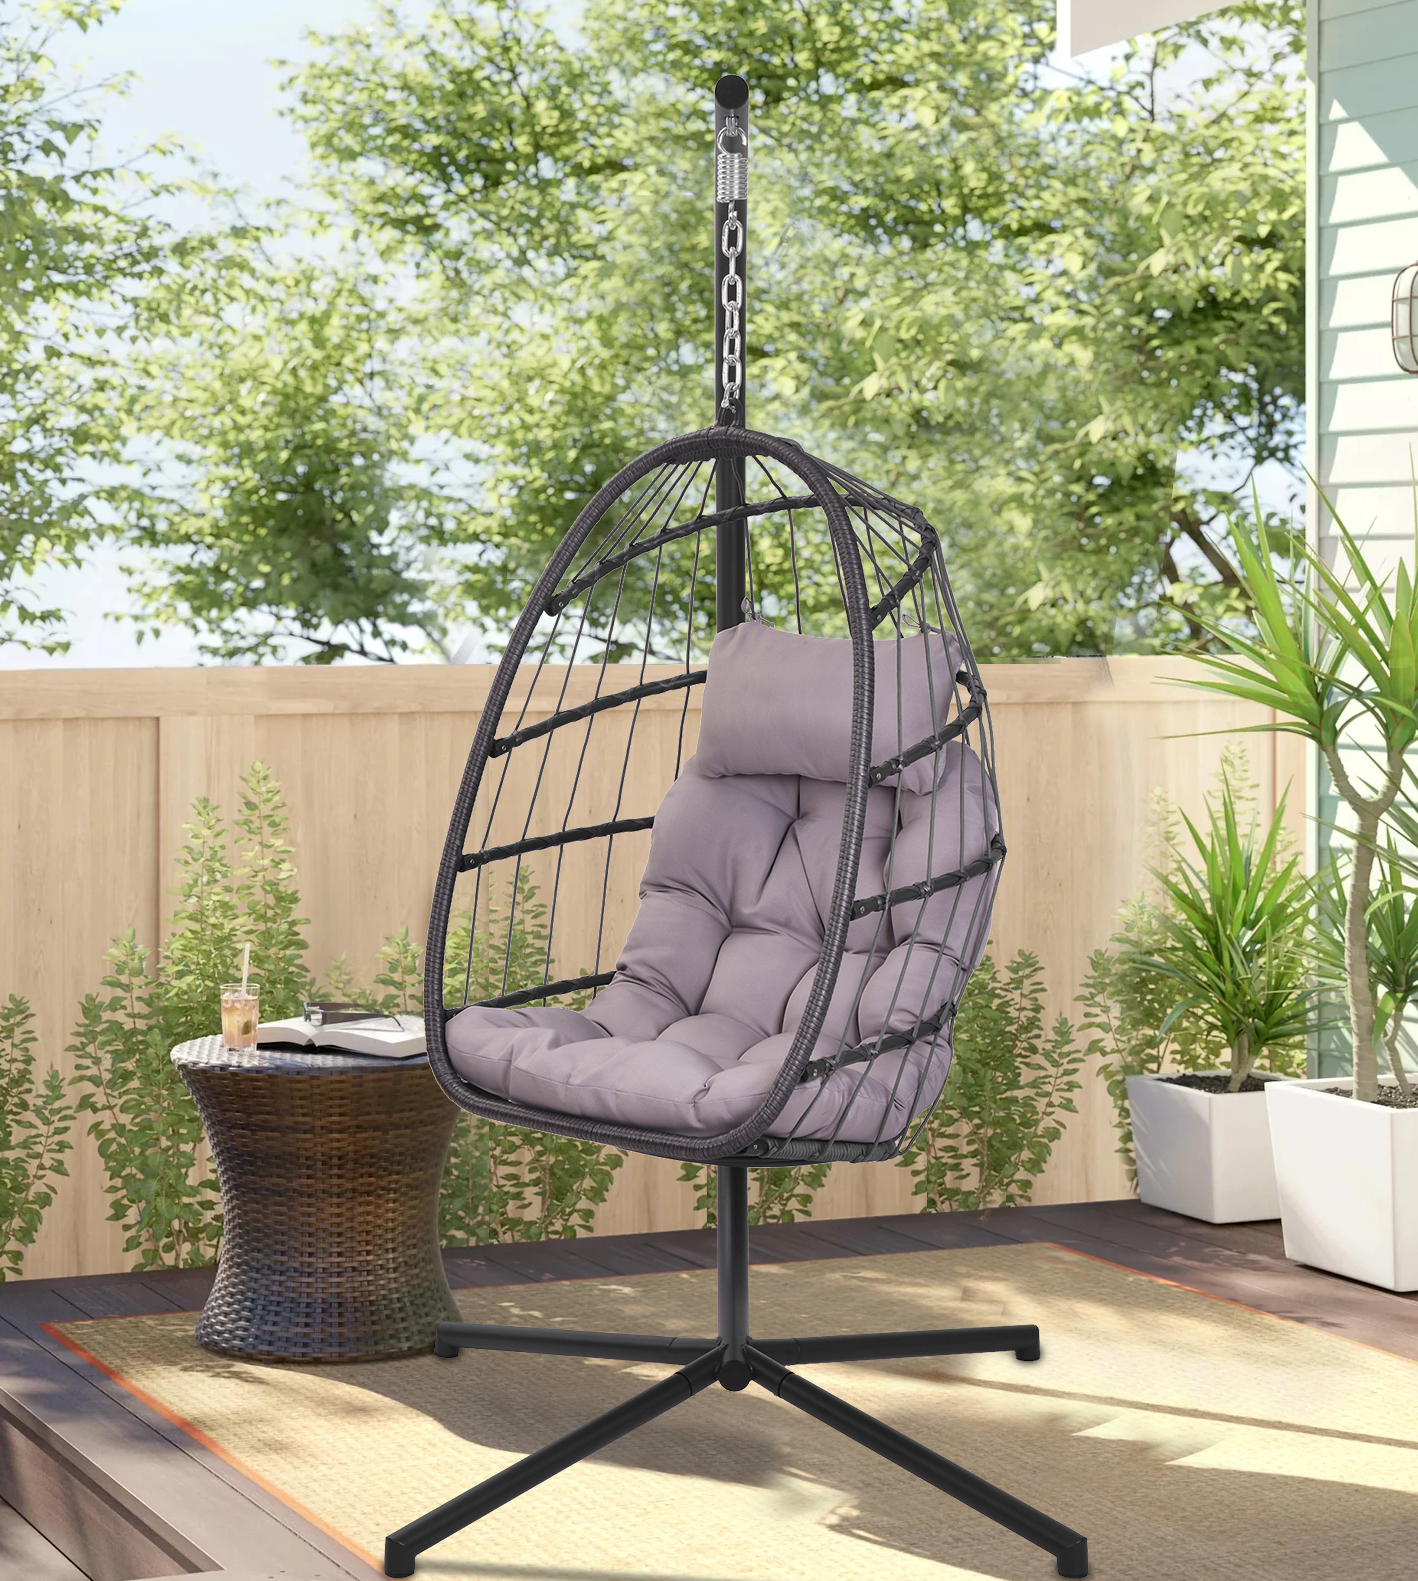 Outdoor Swing Chair, Wicker Egg Chair with Stand and Cushions, Hanging Chair for Bedroom Patio Porch Balcony, Hammock Chair Outdoor Lounger, Gray - image 1 of 6